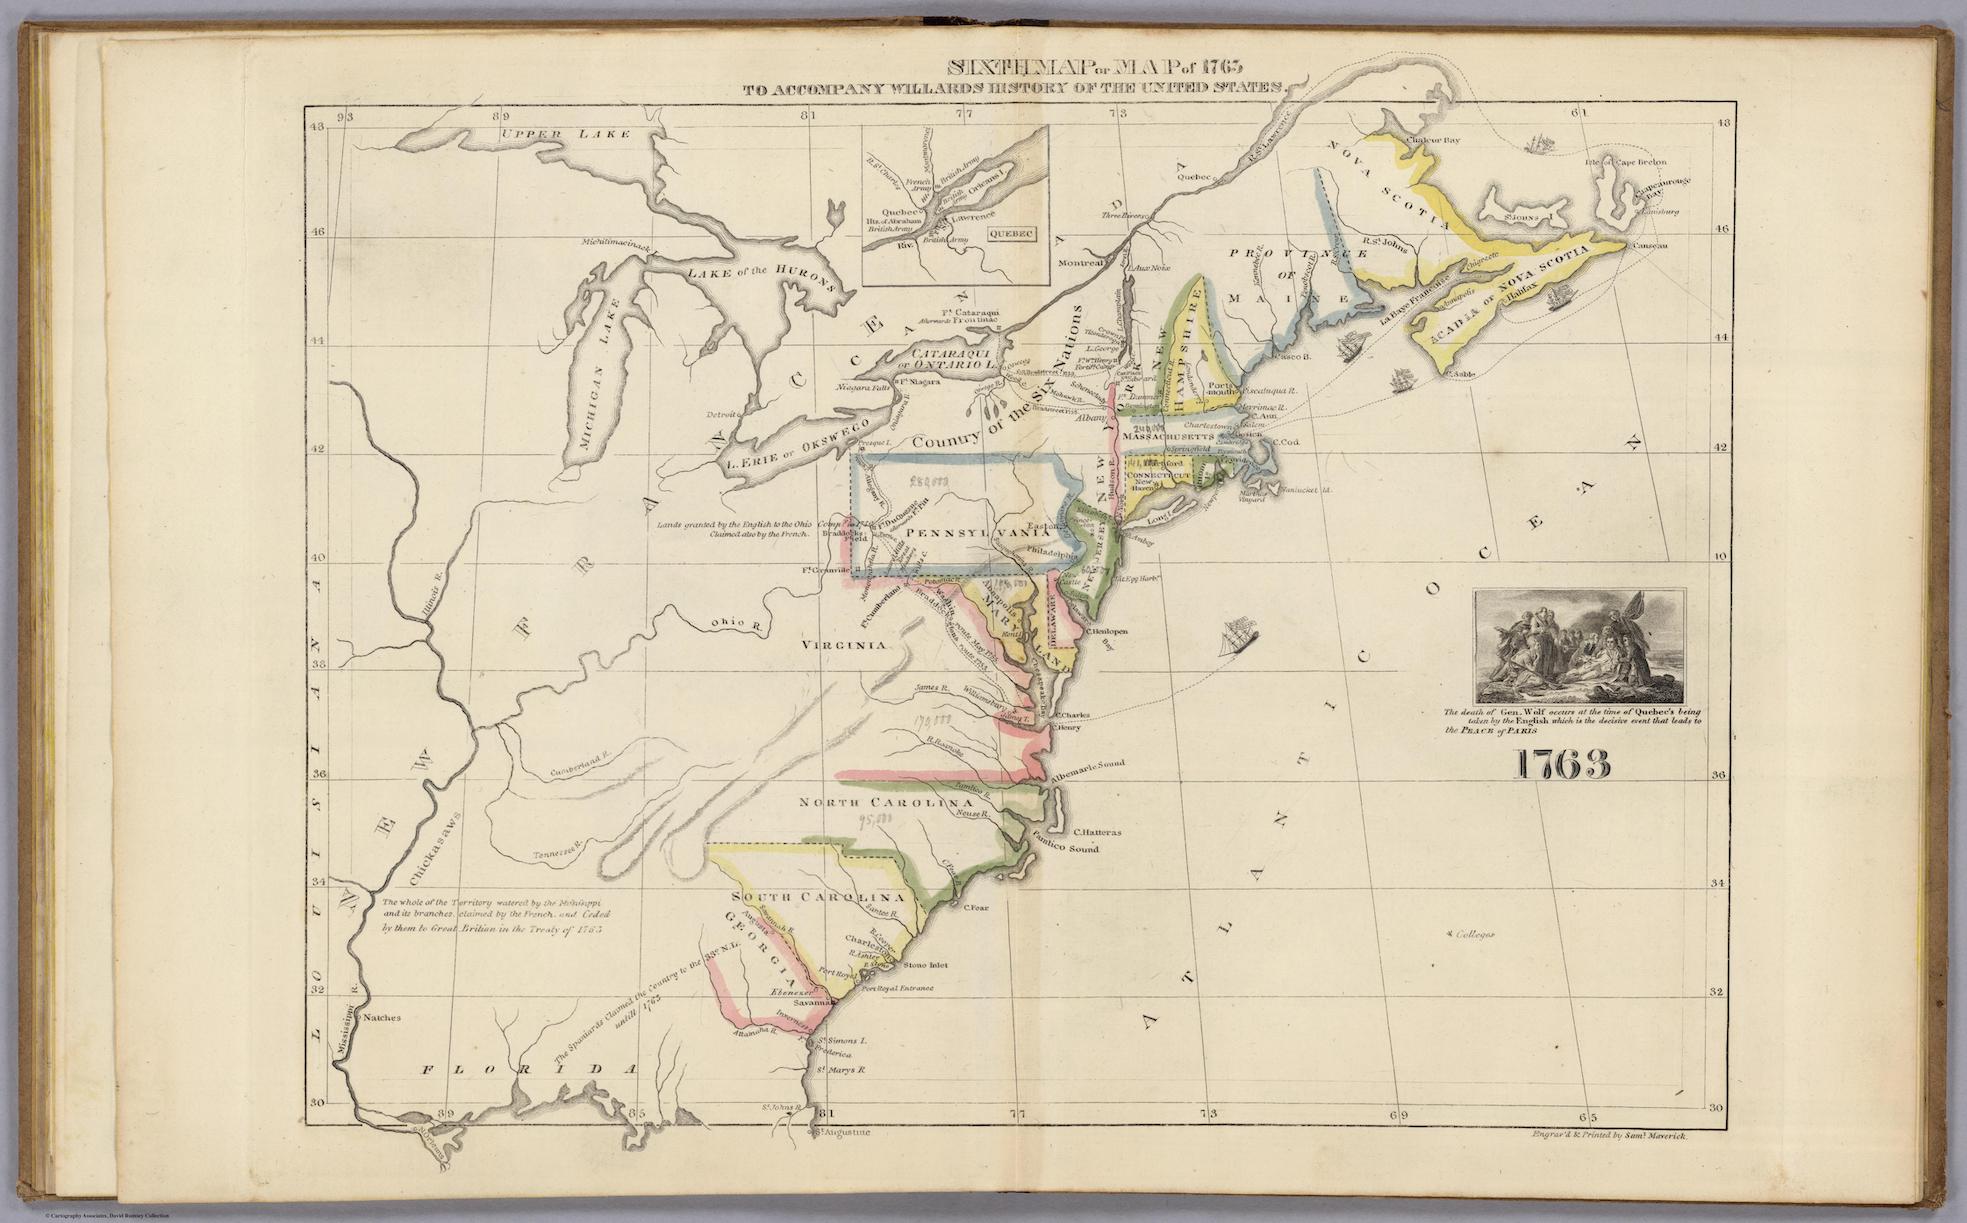 A horizontally-oriented map of North America in 1763 that includes similar highlighted colors to the previous maps. The expanse of the New France territory stretches down to the southern area of the United States from Canada, and Great Lakes Michigan and the “Lake of the Hurons” are named. Along the top of the map near the center half of the page, a smaller image of Quebec is drawn. About halfway down the right-hand side of the map, an illustration depicts a figure laying sideways in someone’s arms surrounded by a small crowd of people, and the caption reads: “The death of Gen. Wolf occurs at the time of Quebec’s being taken by the English which is the decisive event that leads to the Peace of Paris.”